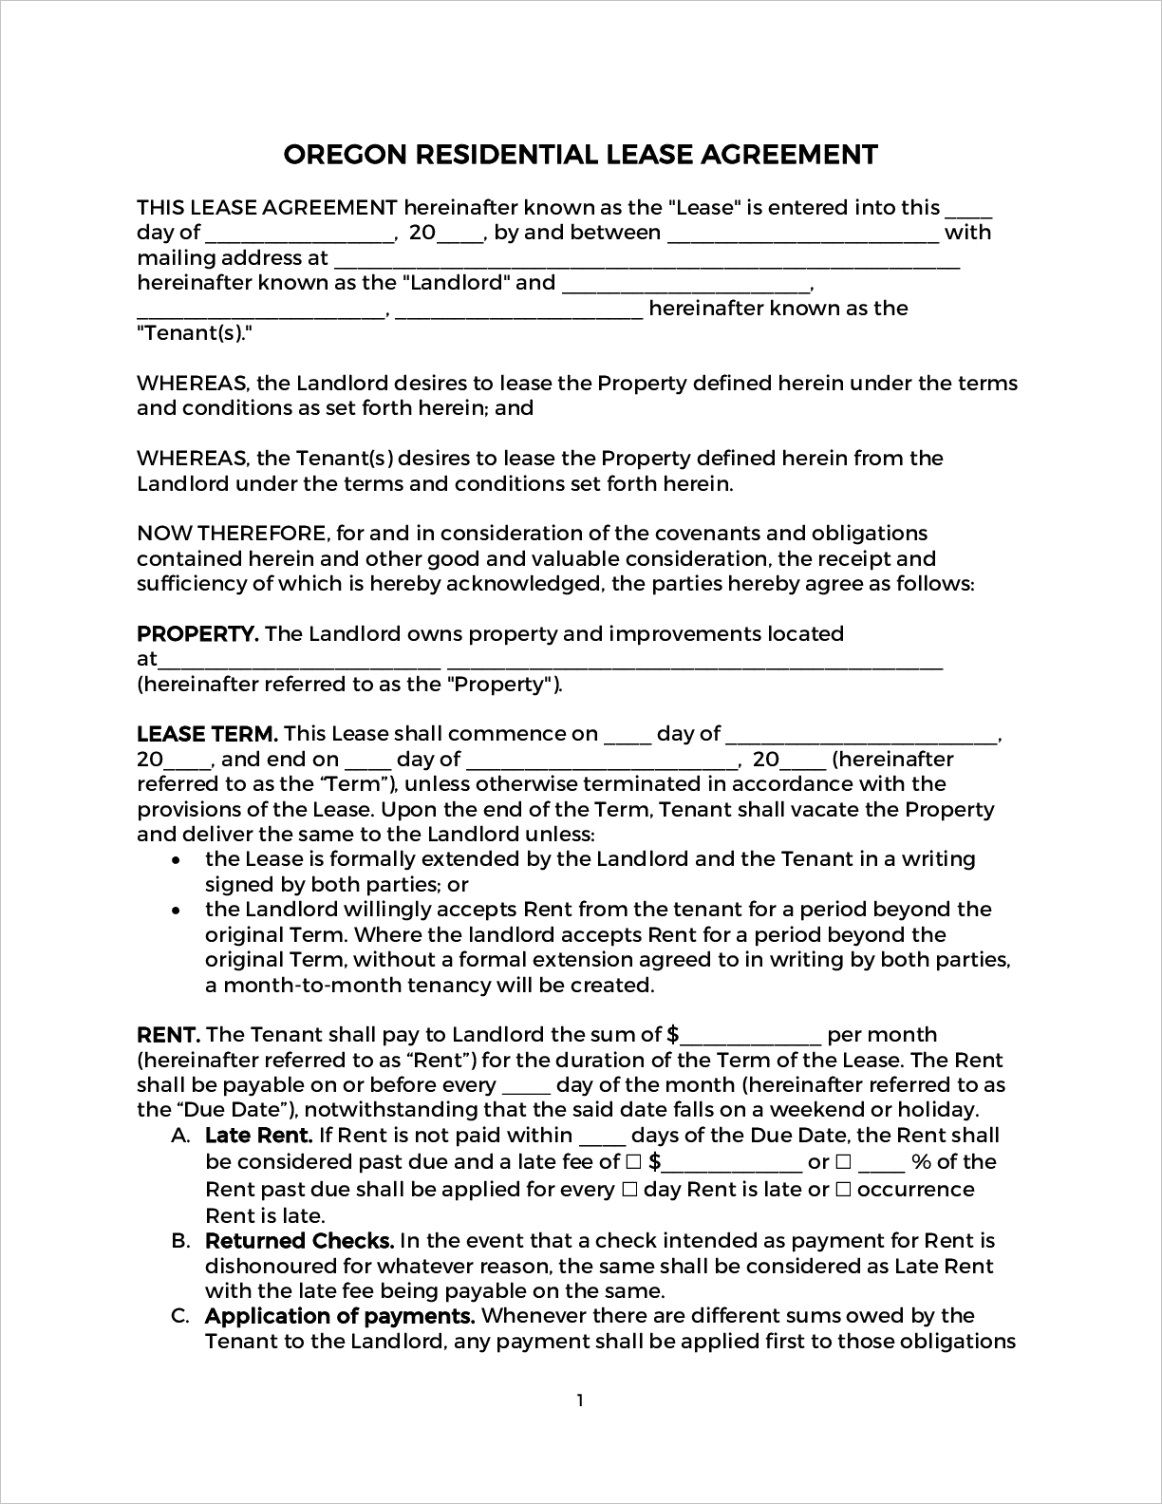 oregon residential lease agreement